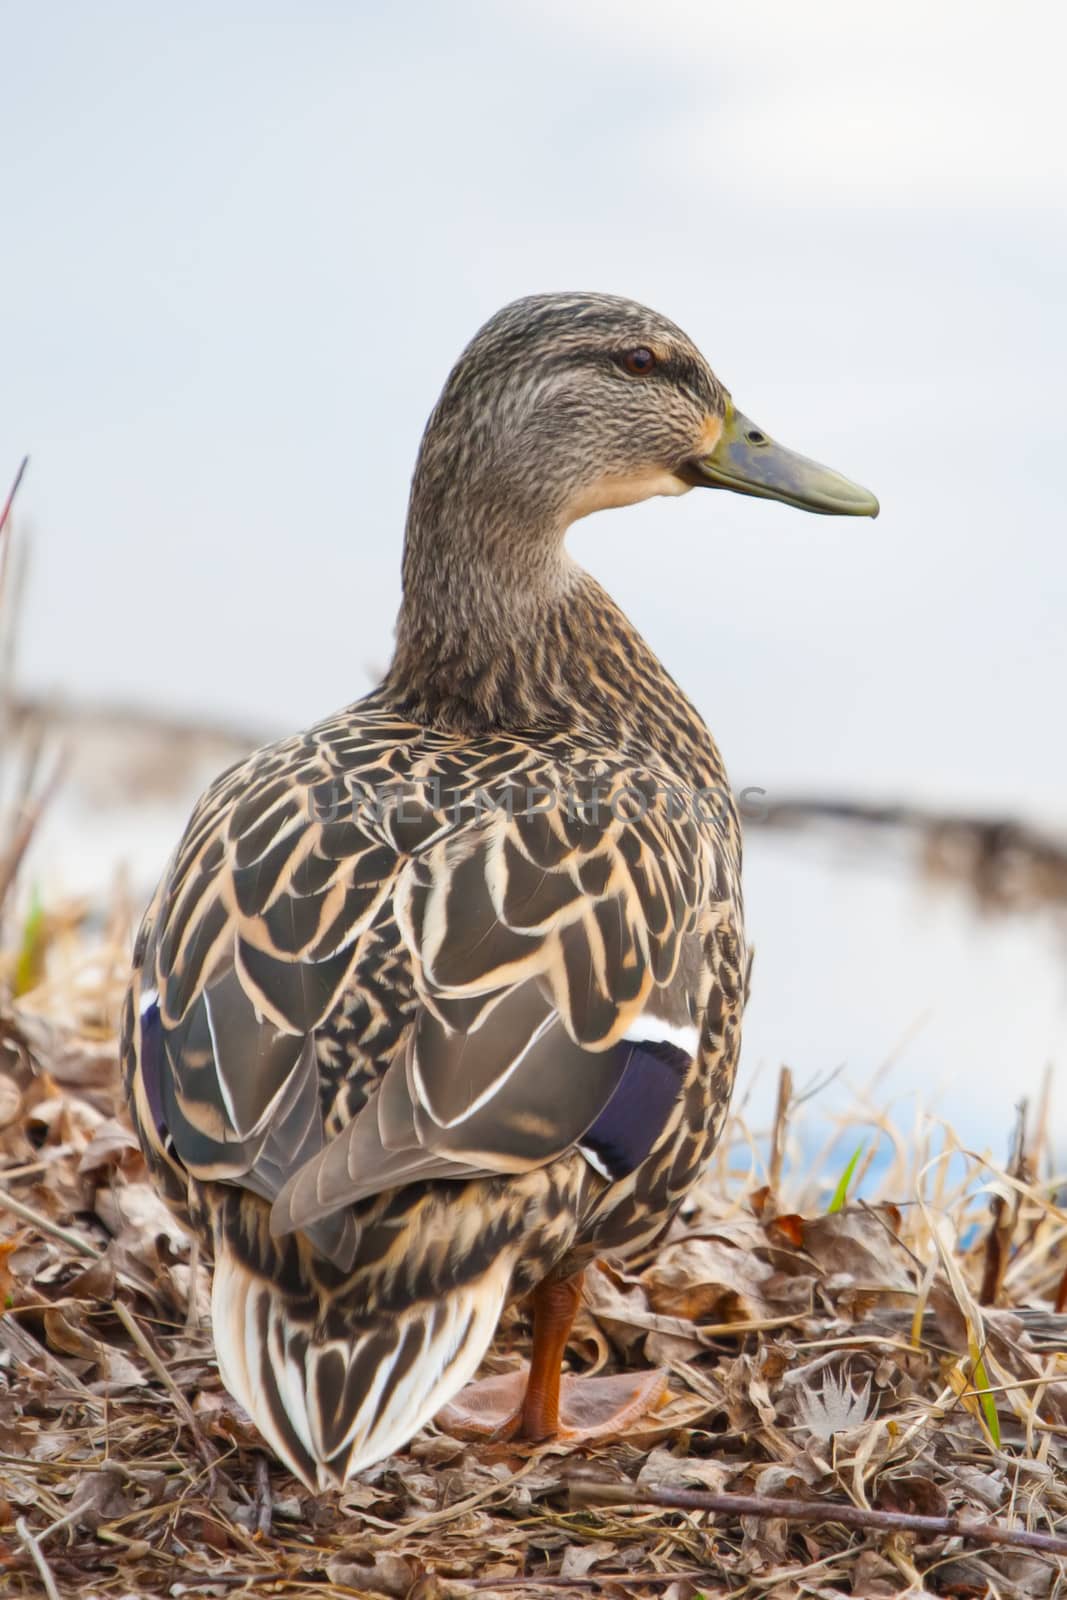 Female Mallard standing at the waters edge in soft focus